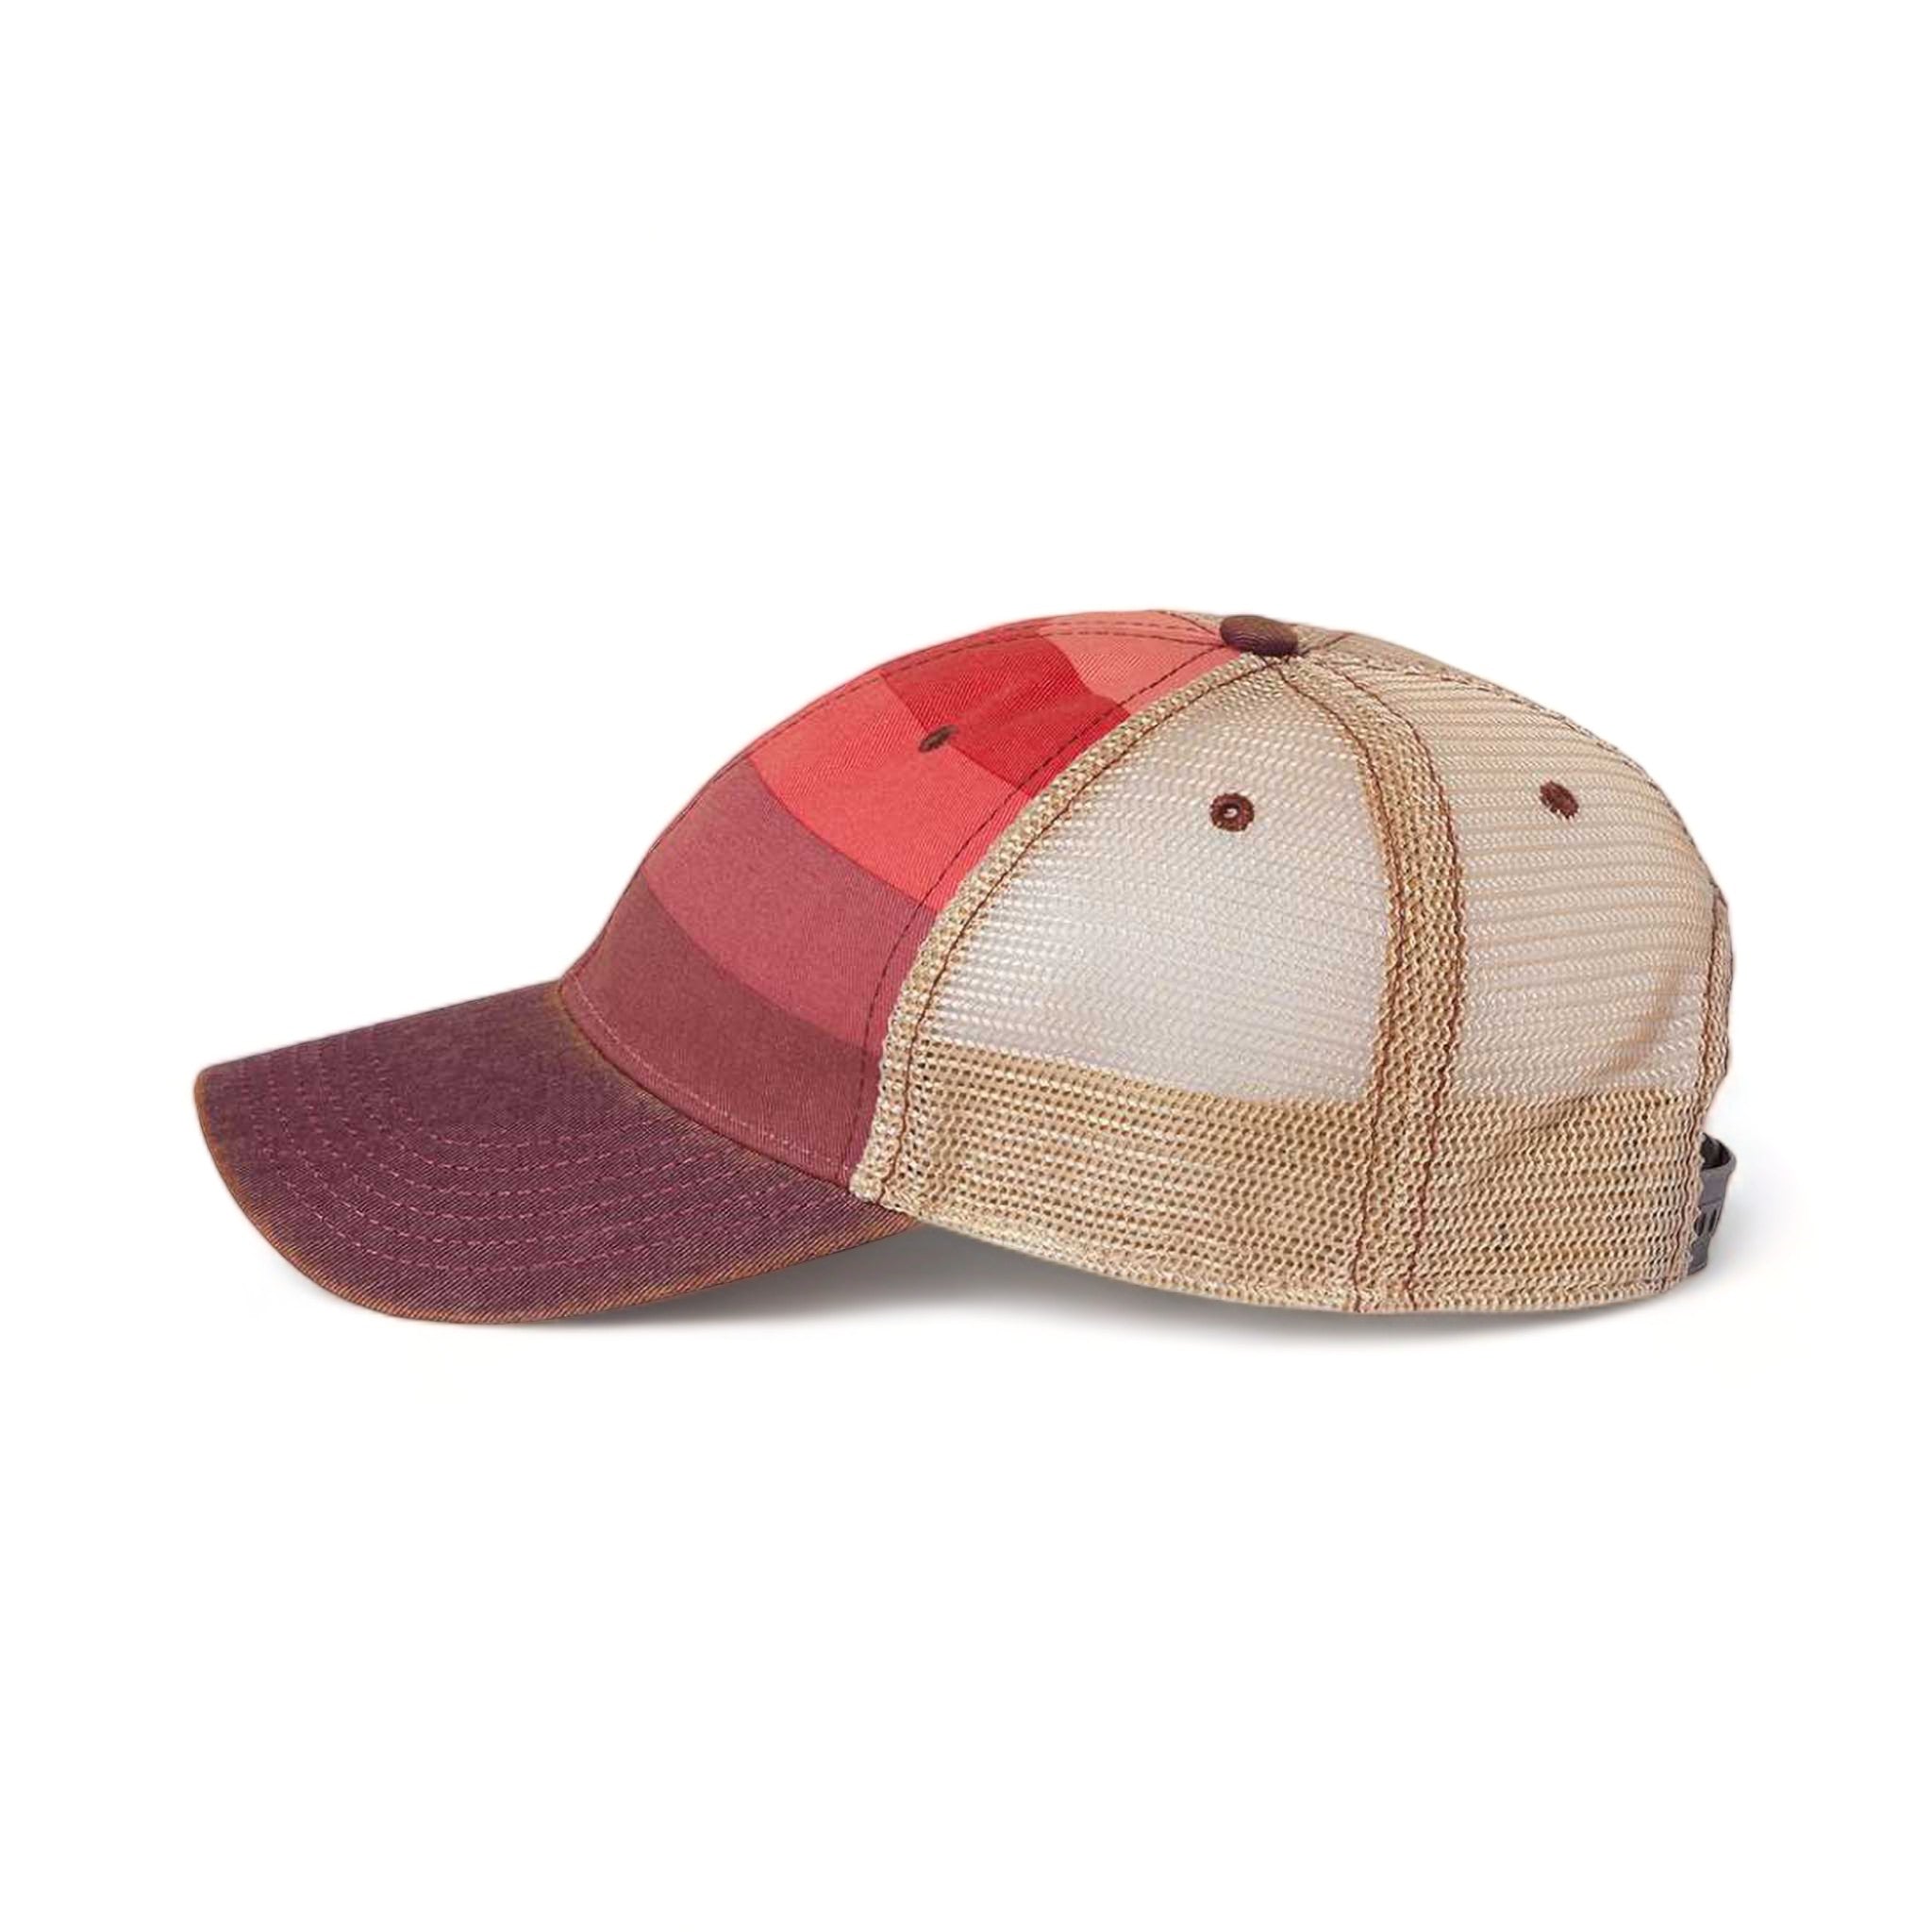 Side view of LEGACY OFA custom hat in red stripe and khaki